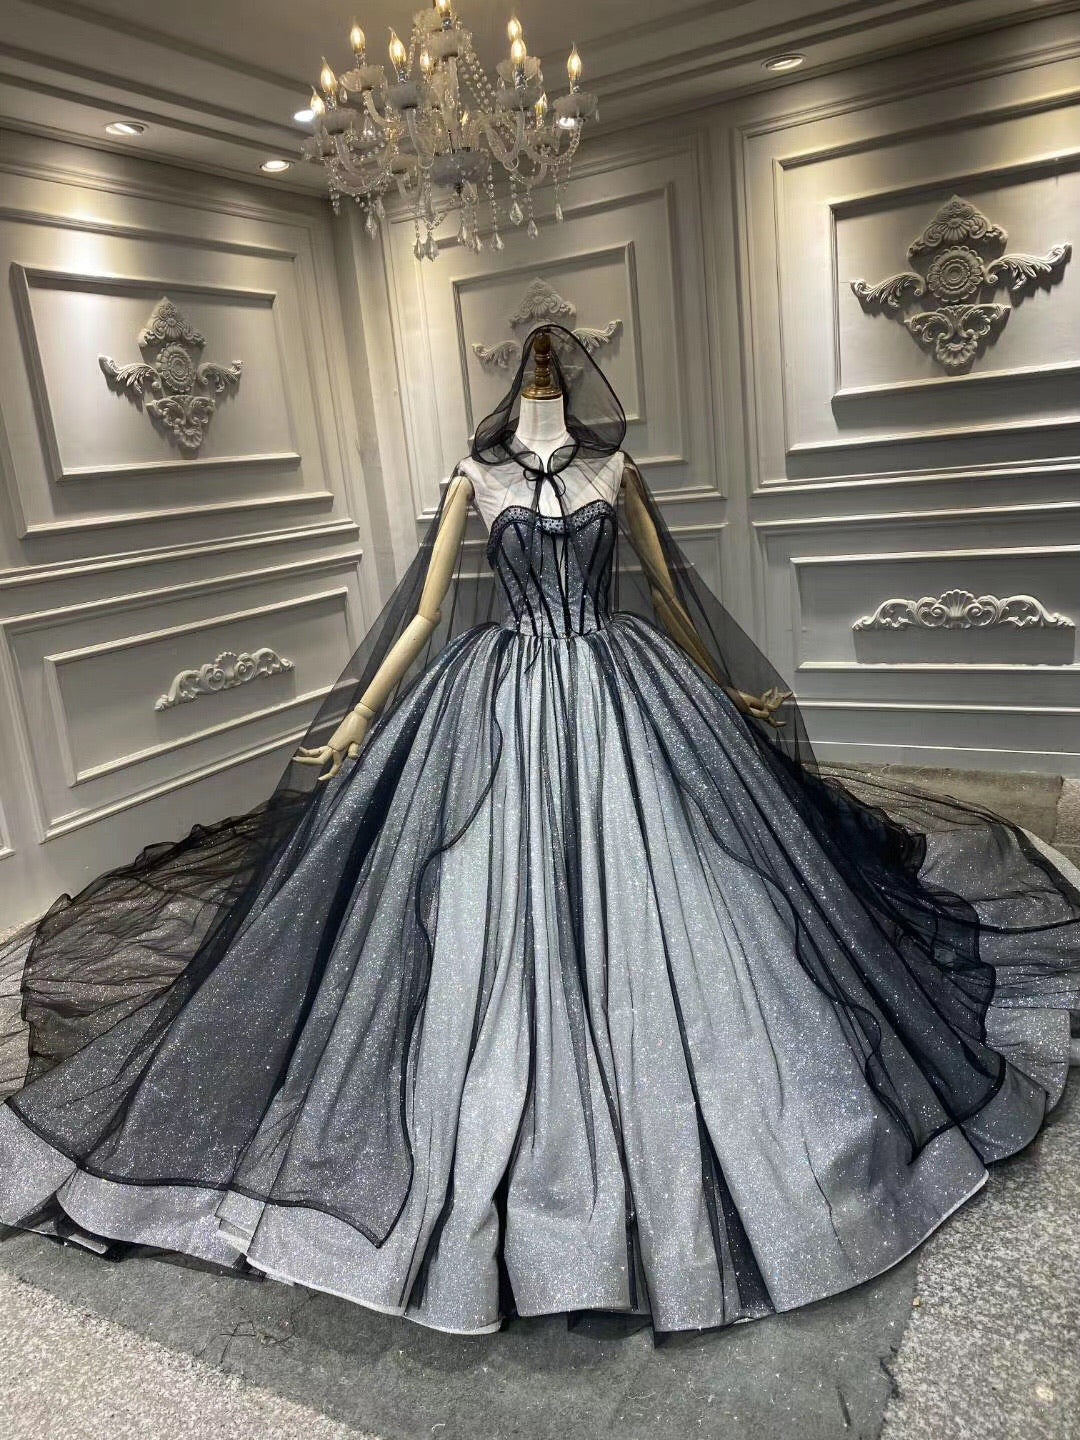 Victorian Gothic Corset Ball Gown With Appliques Black And White Gothic Wedding  Dresses For Country Weddings 2019 From Startdress, $132.07 | DHgate.Com